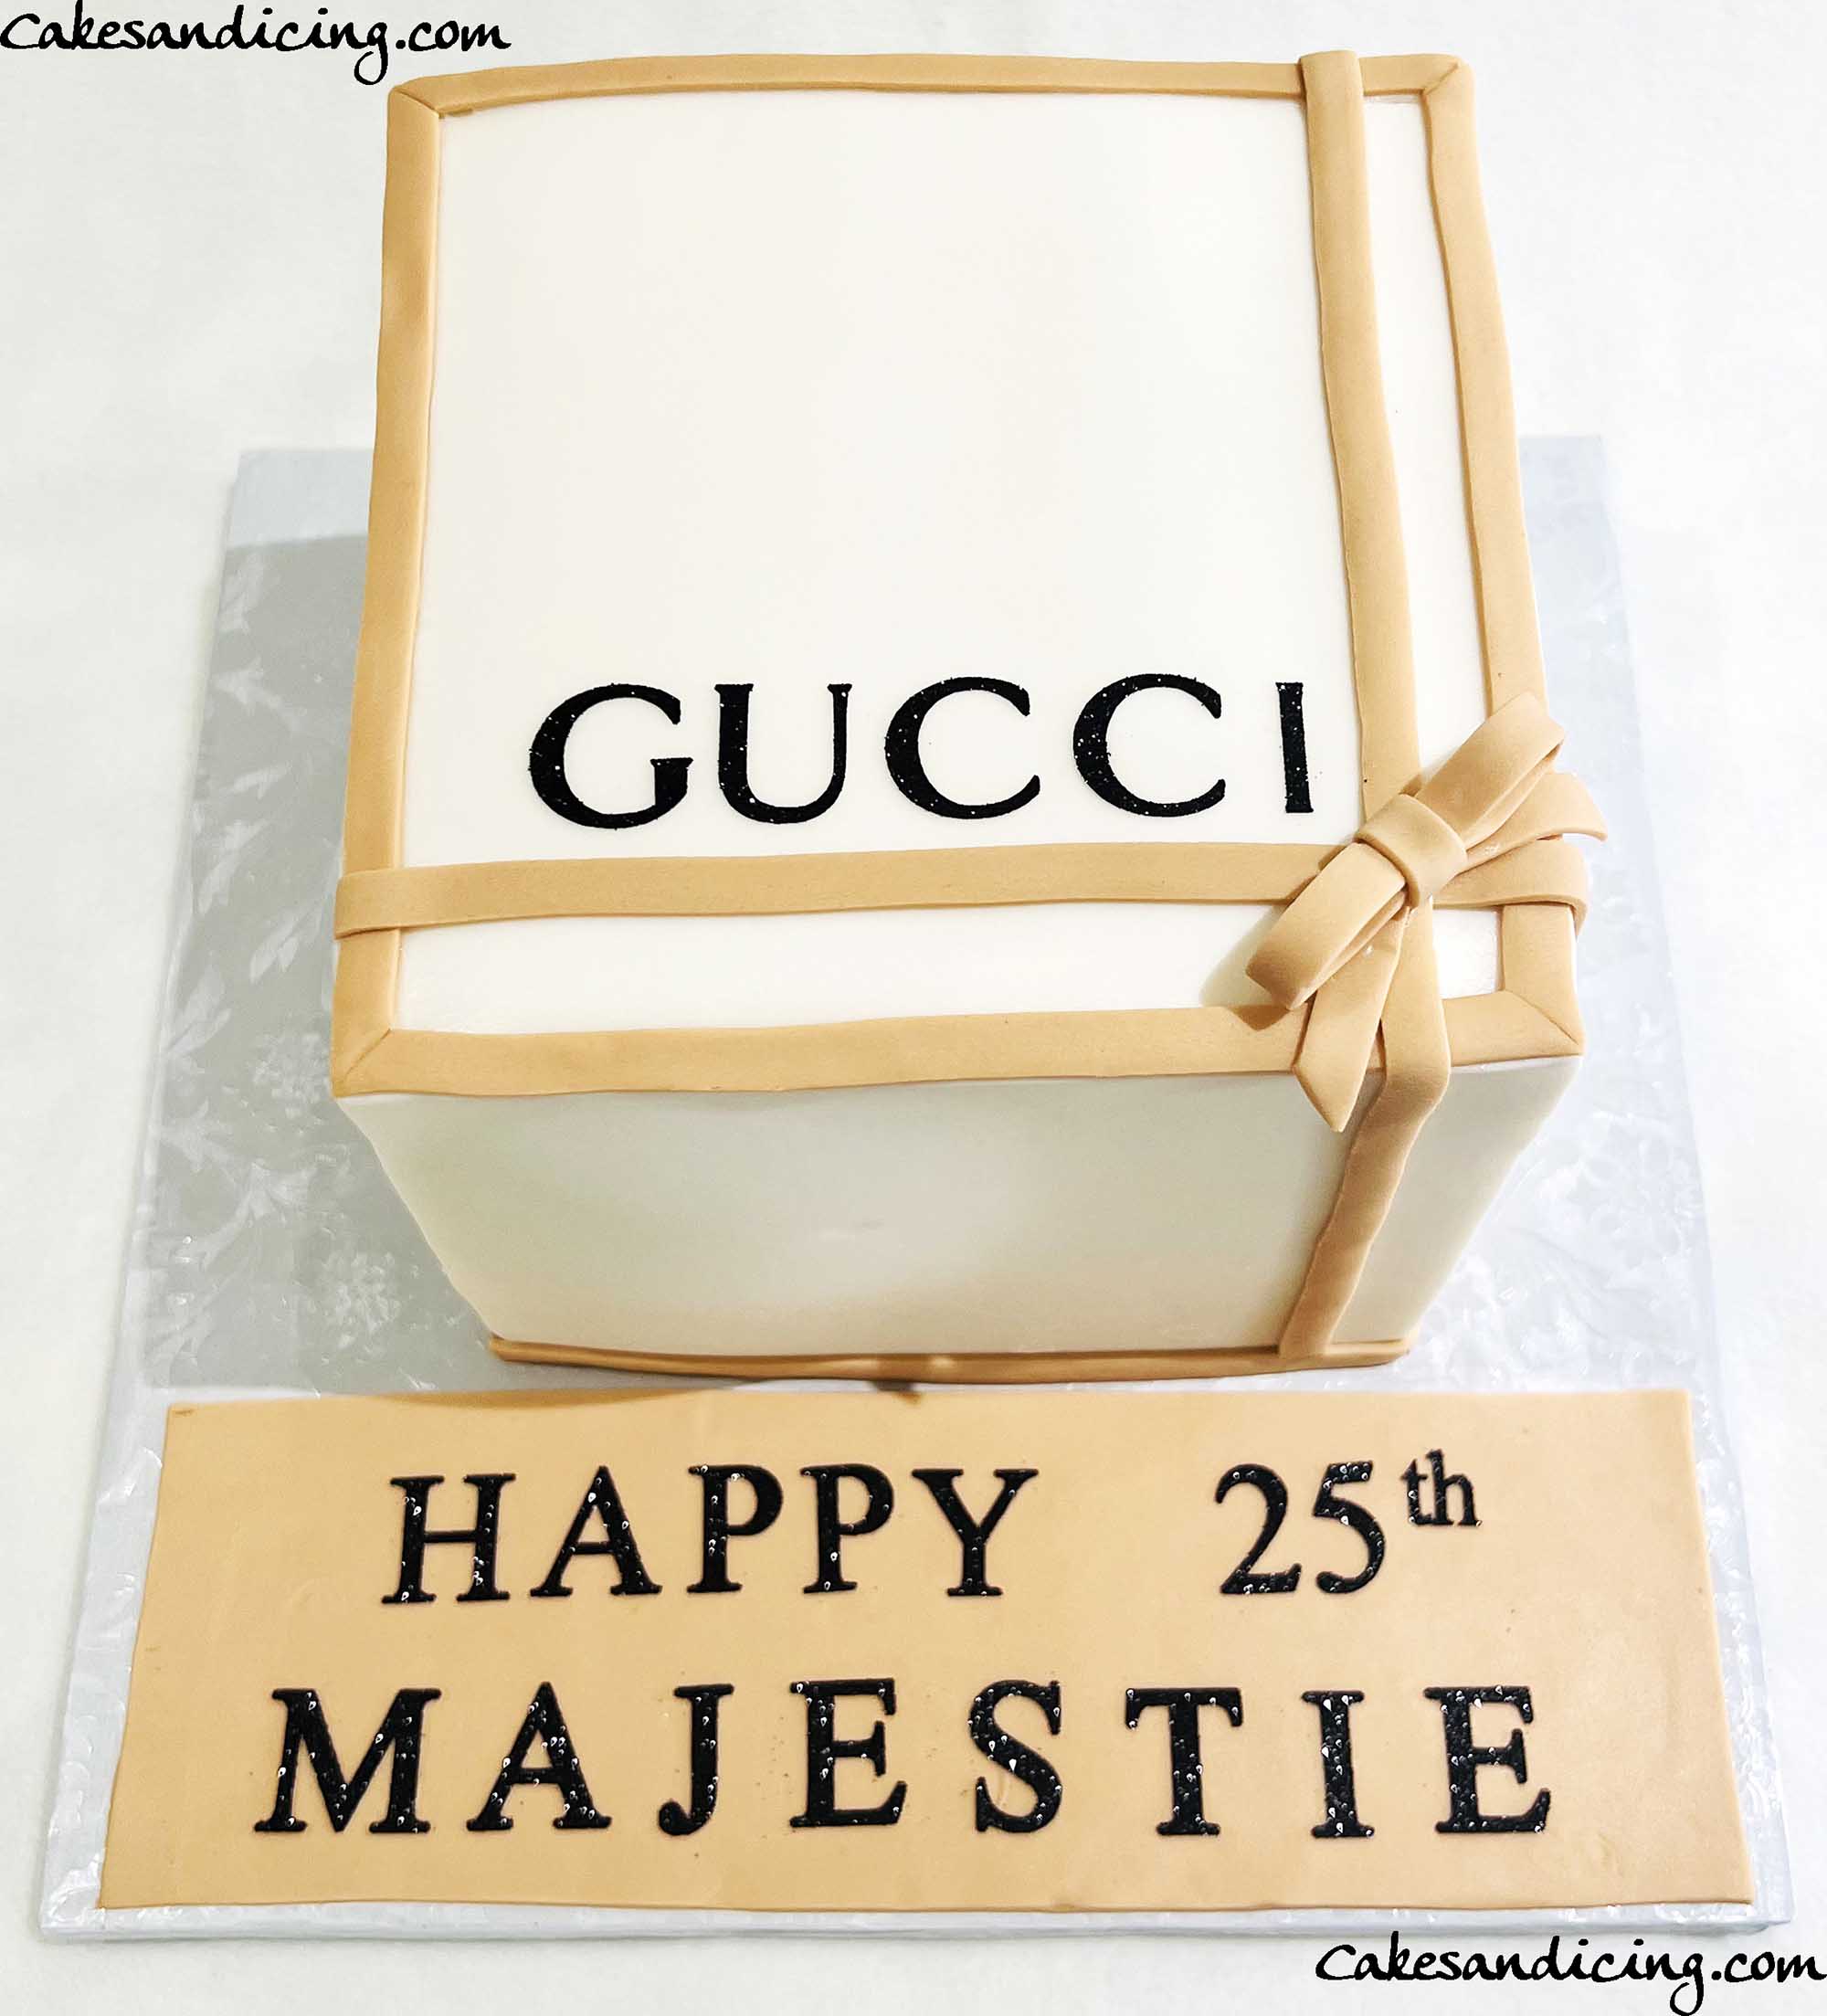 Gucci Cake design How to make Gucci print on cake, using royal icing #gucci  